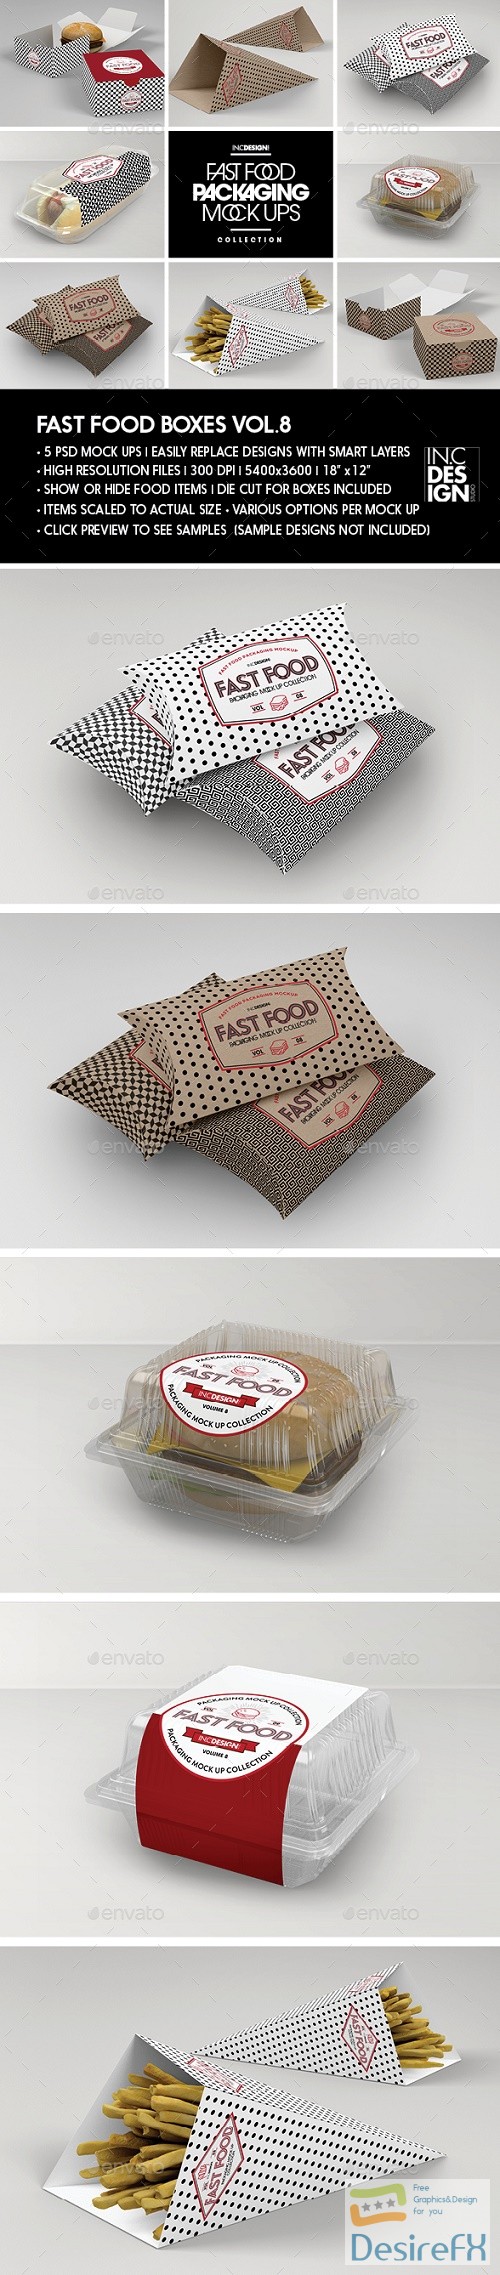 Fast Food Boxes Vol.8: Take Out Packaging Mock Ups - 19181969